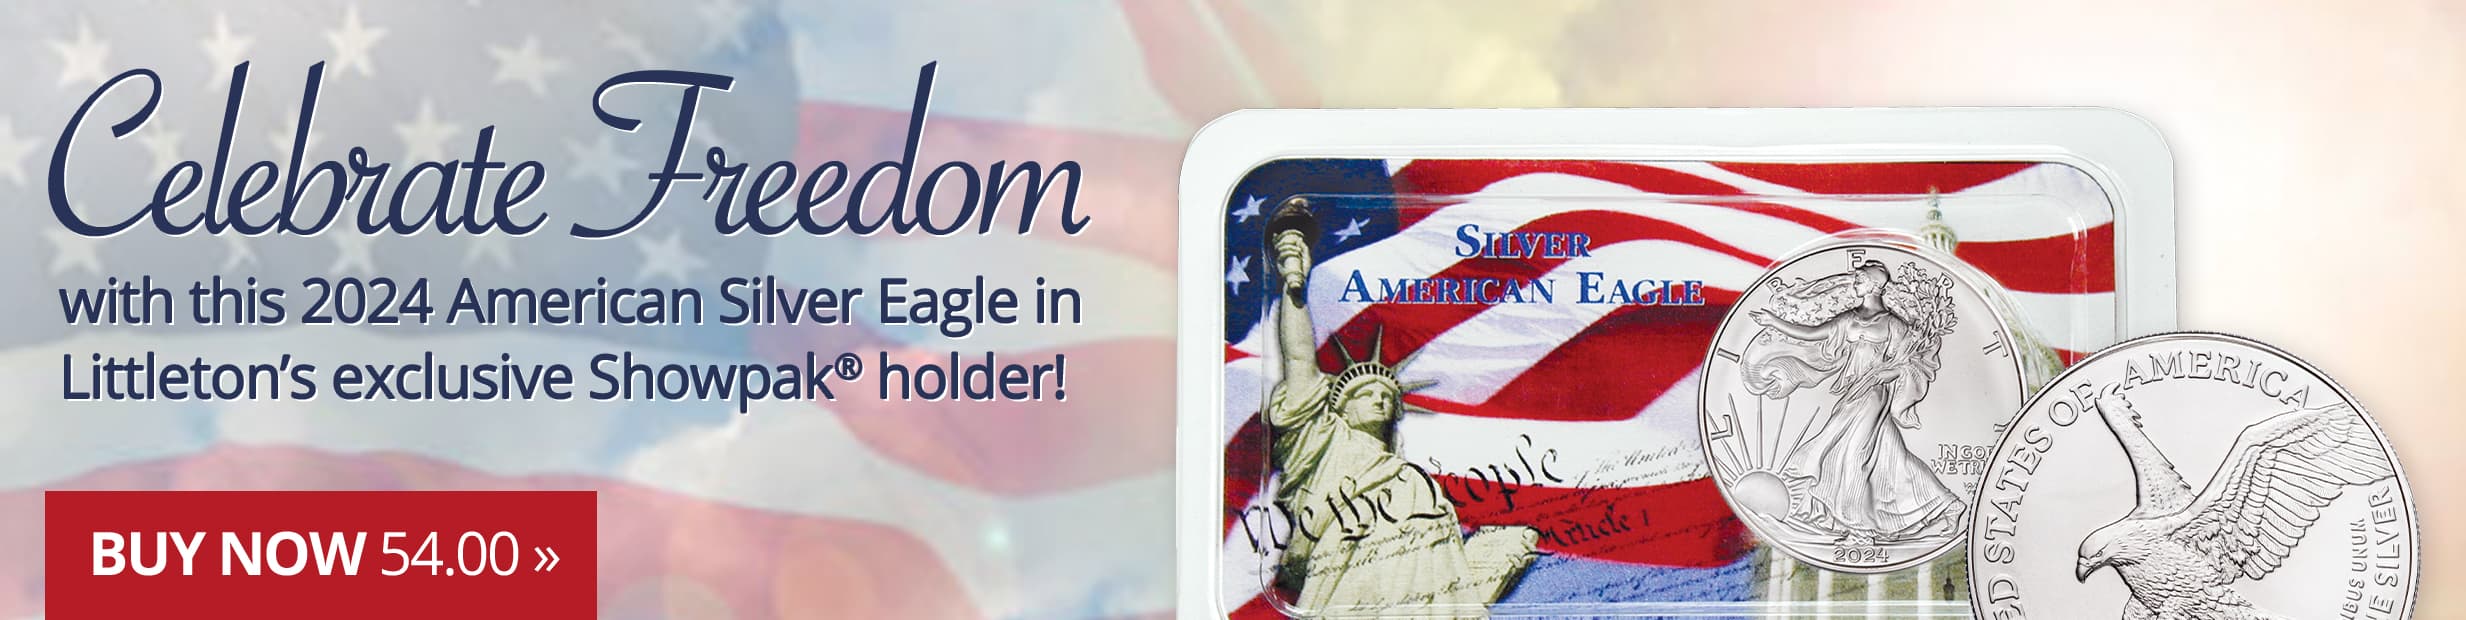 Celebrate Freedom with this 2024 American Silver Eagle in Littleton's exclusive Showpak holder!